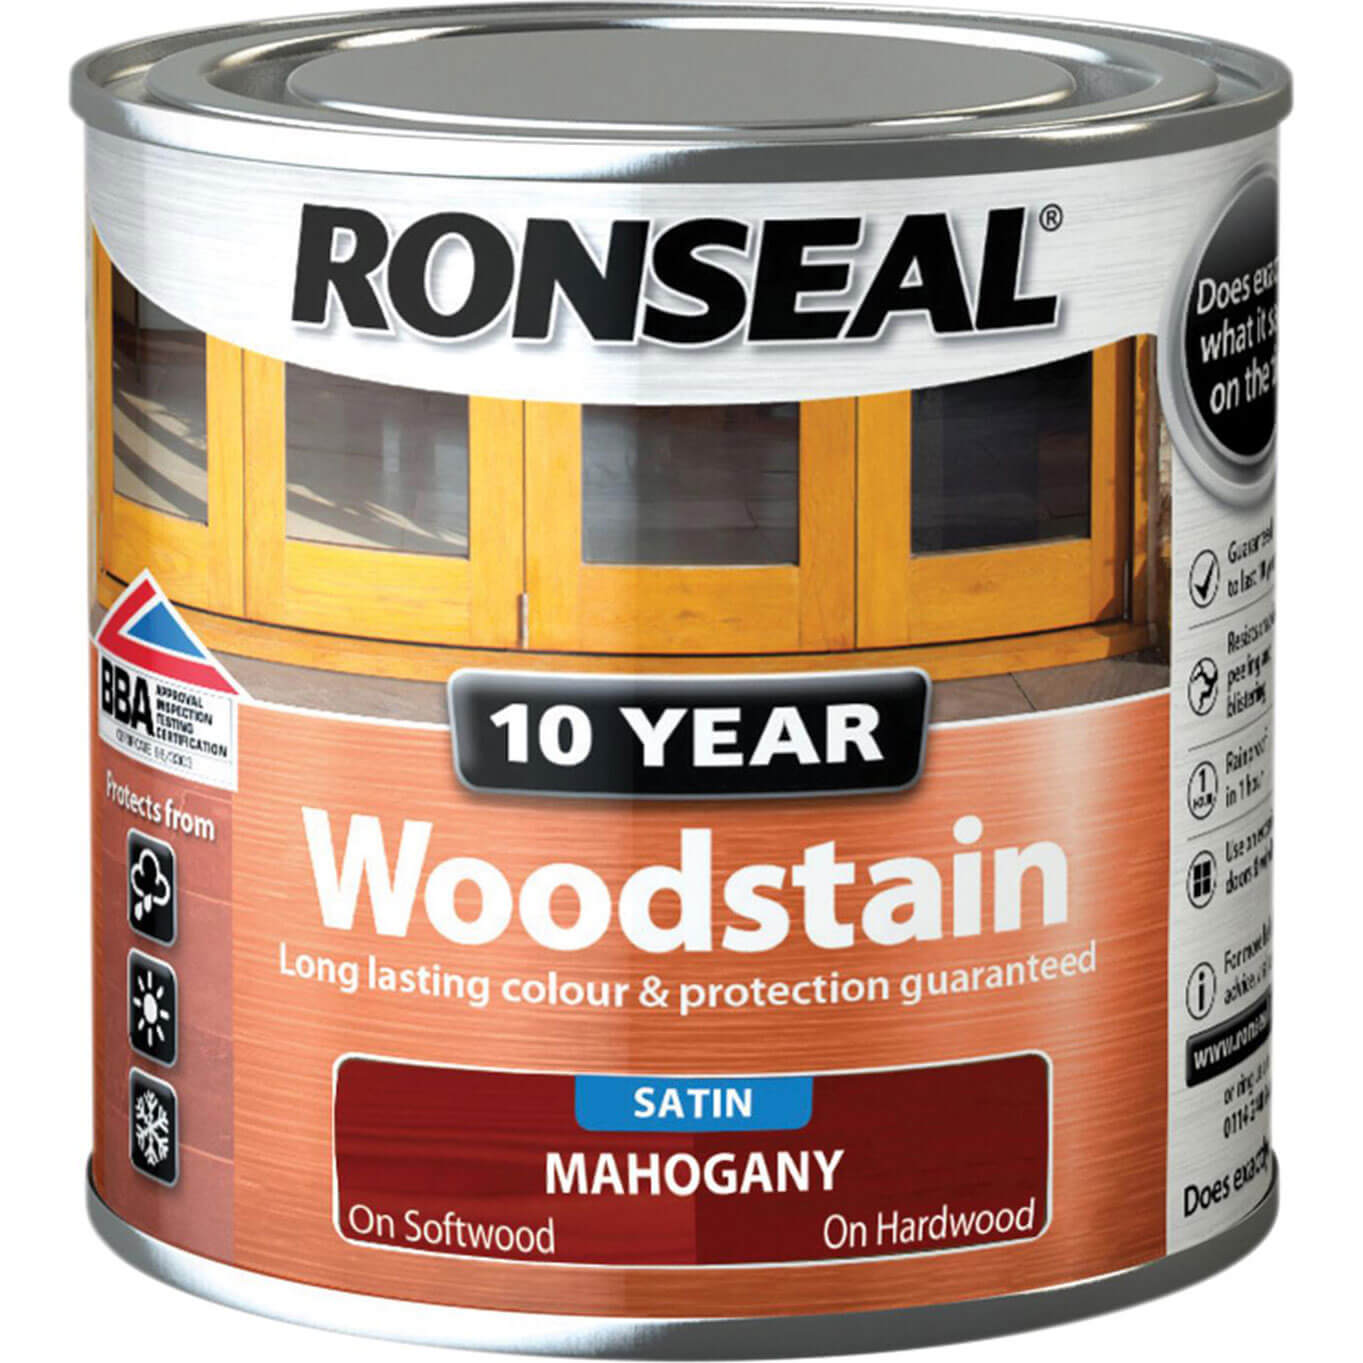 Image of Ronseal 10 Year Wood Stain Mahogany 250ml